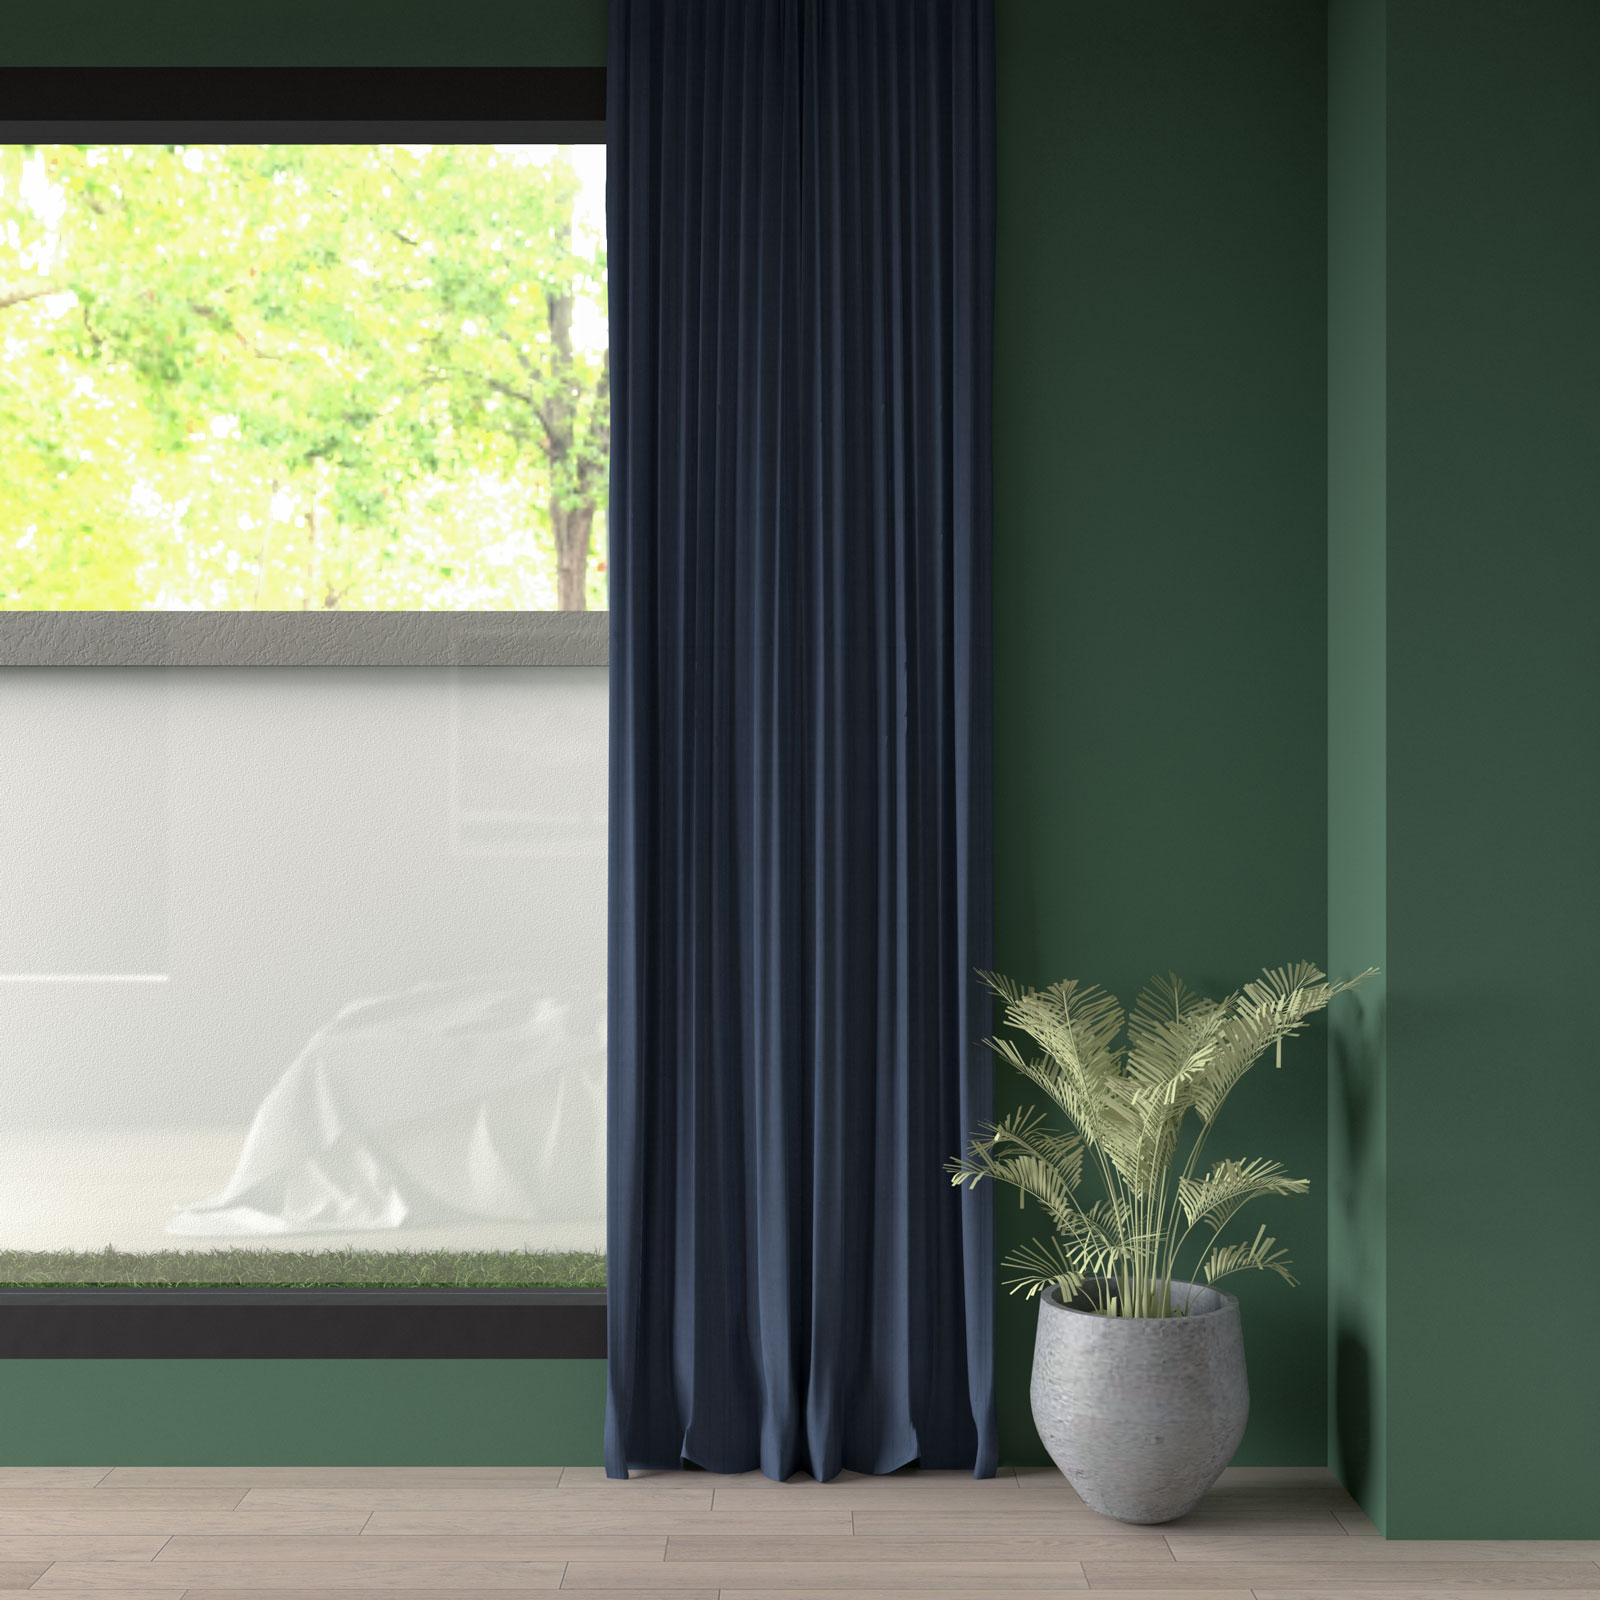 Blue curtains with gray-green walls